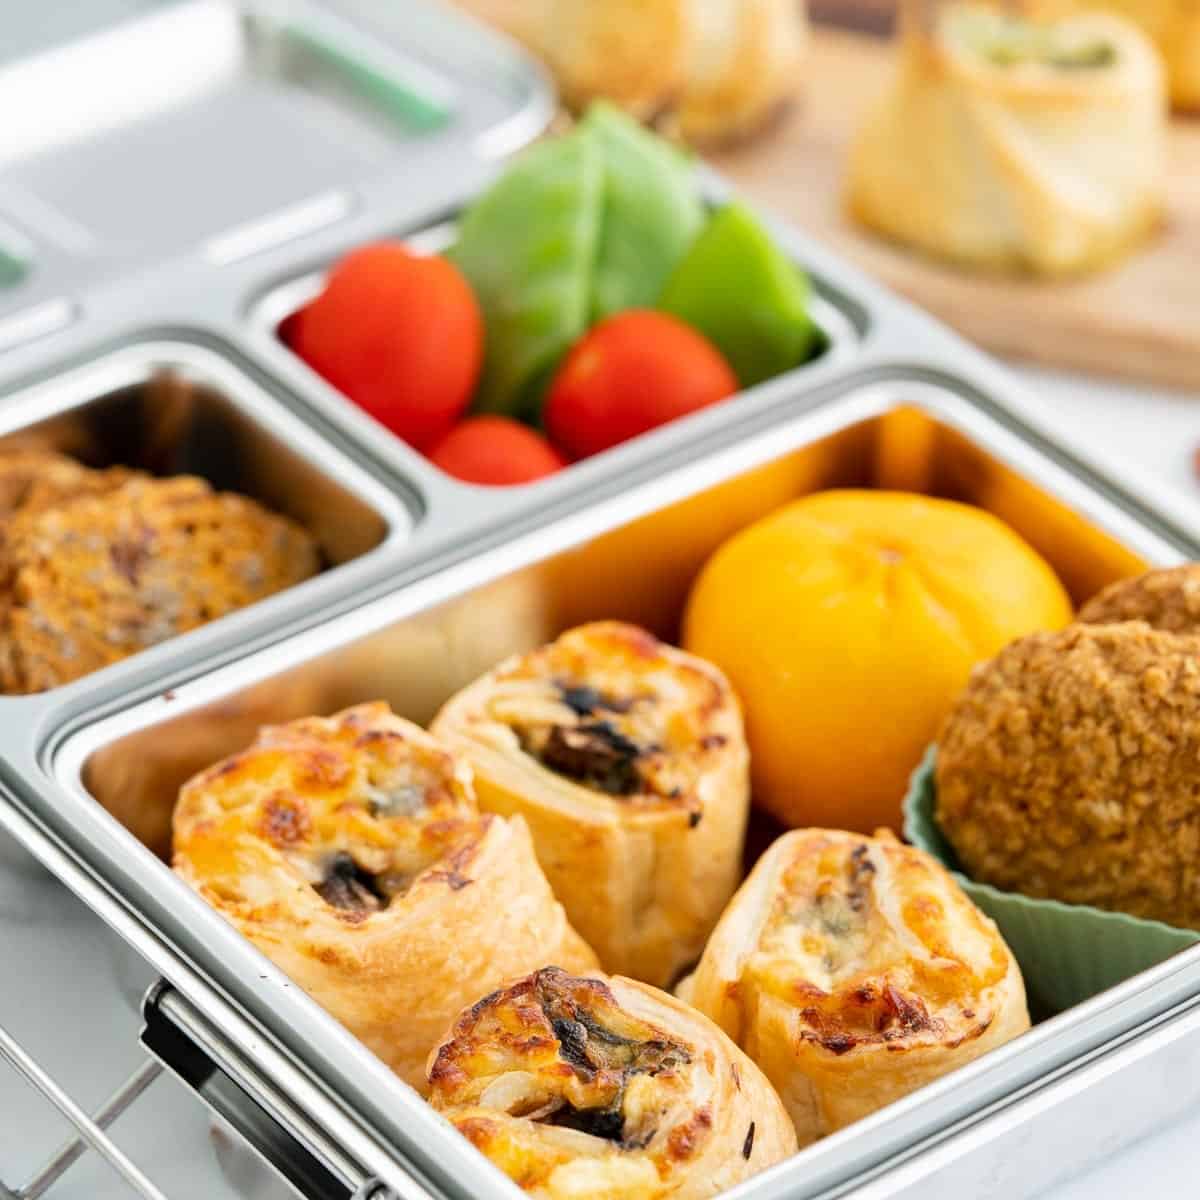 Chicken and alfredo puff pastry scrolls packed in a stainless steel bento lunchbox with colourful produce.